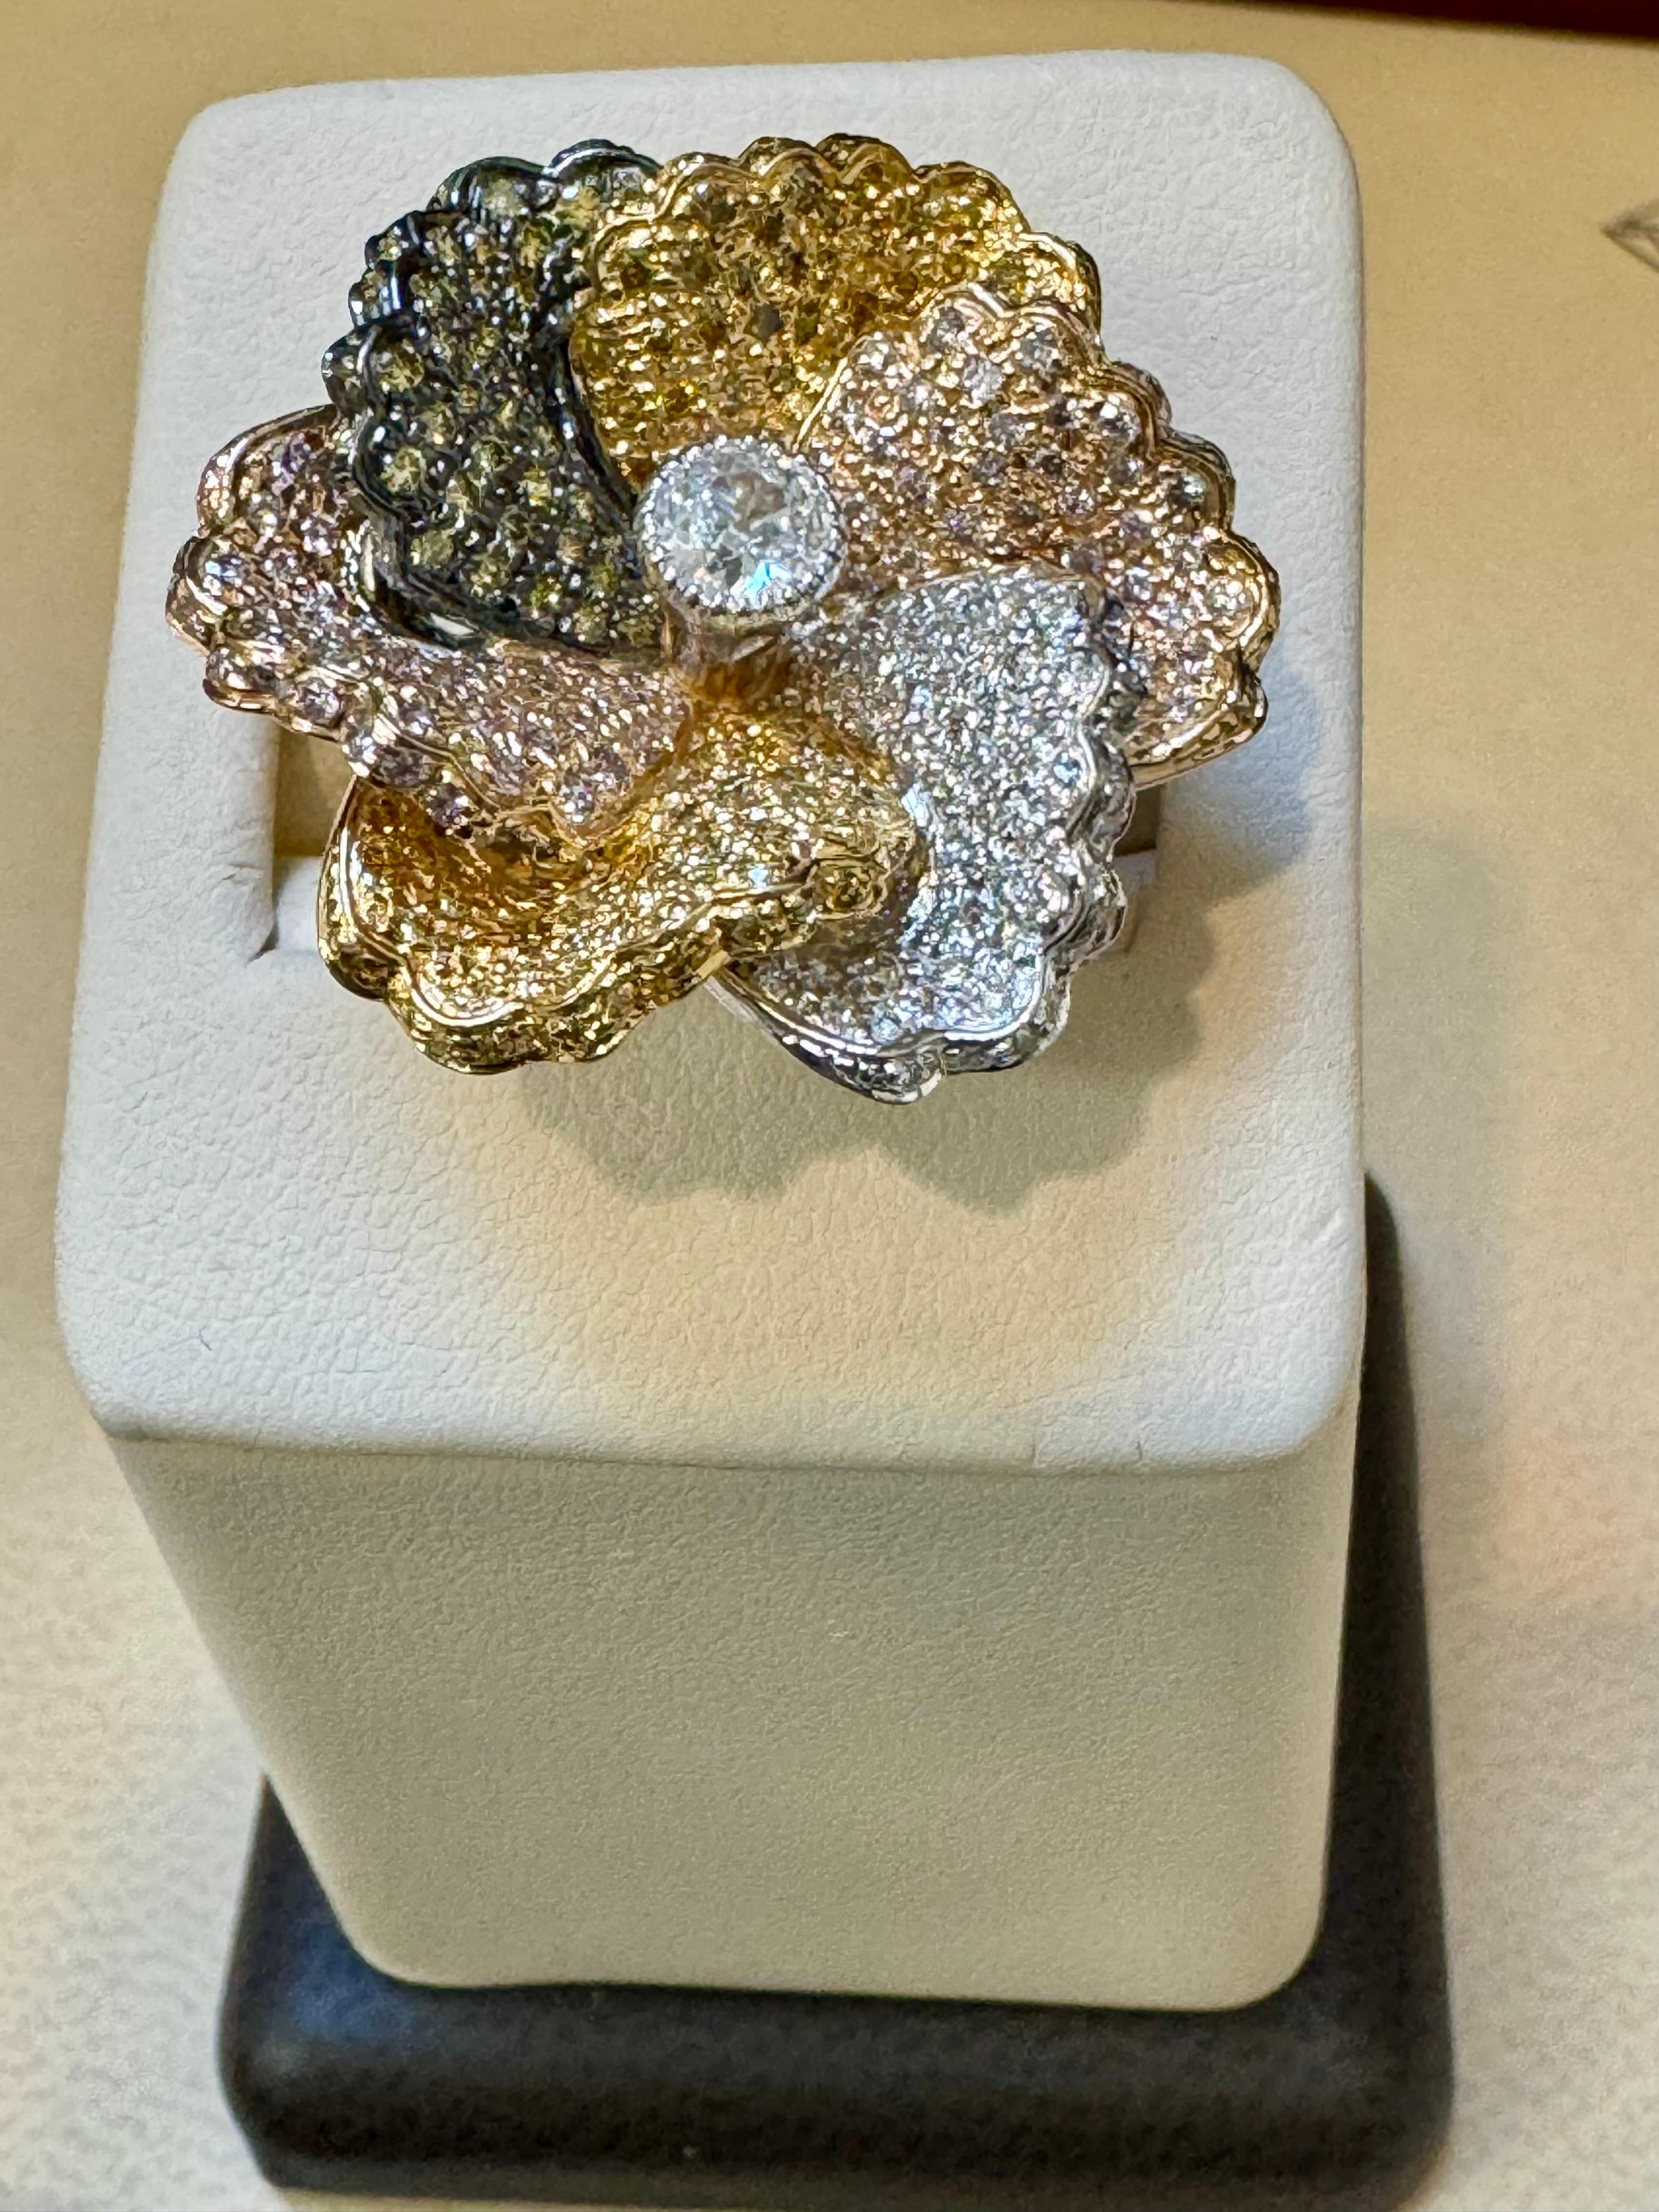 3.3 Ct Natural Fancy Color Diamond Flower Ring in 18 Karat Multi Color Gold Size 6
Approximately 6 Ct Natural  Fancy diamonds are making beautiful petals of flower which has a solitaire diamond in the center.
It has all colors of gold , Yellow ,